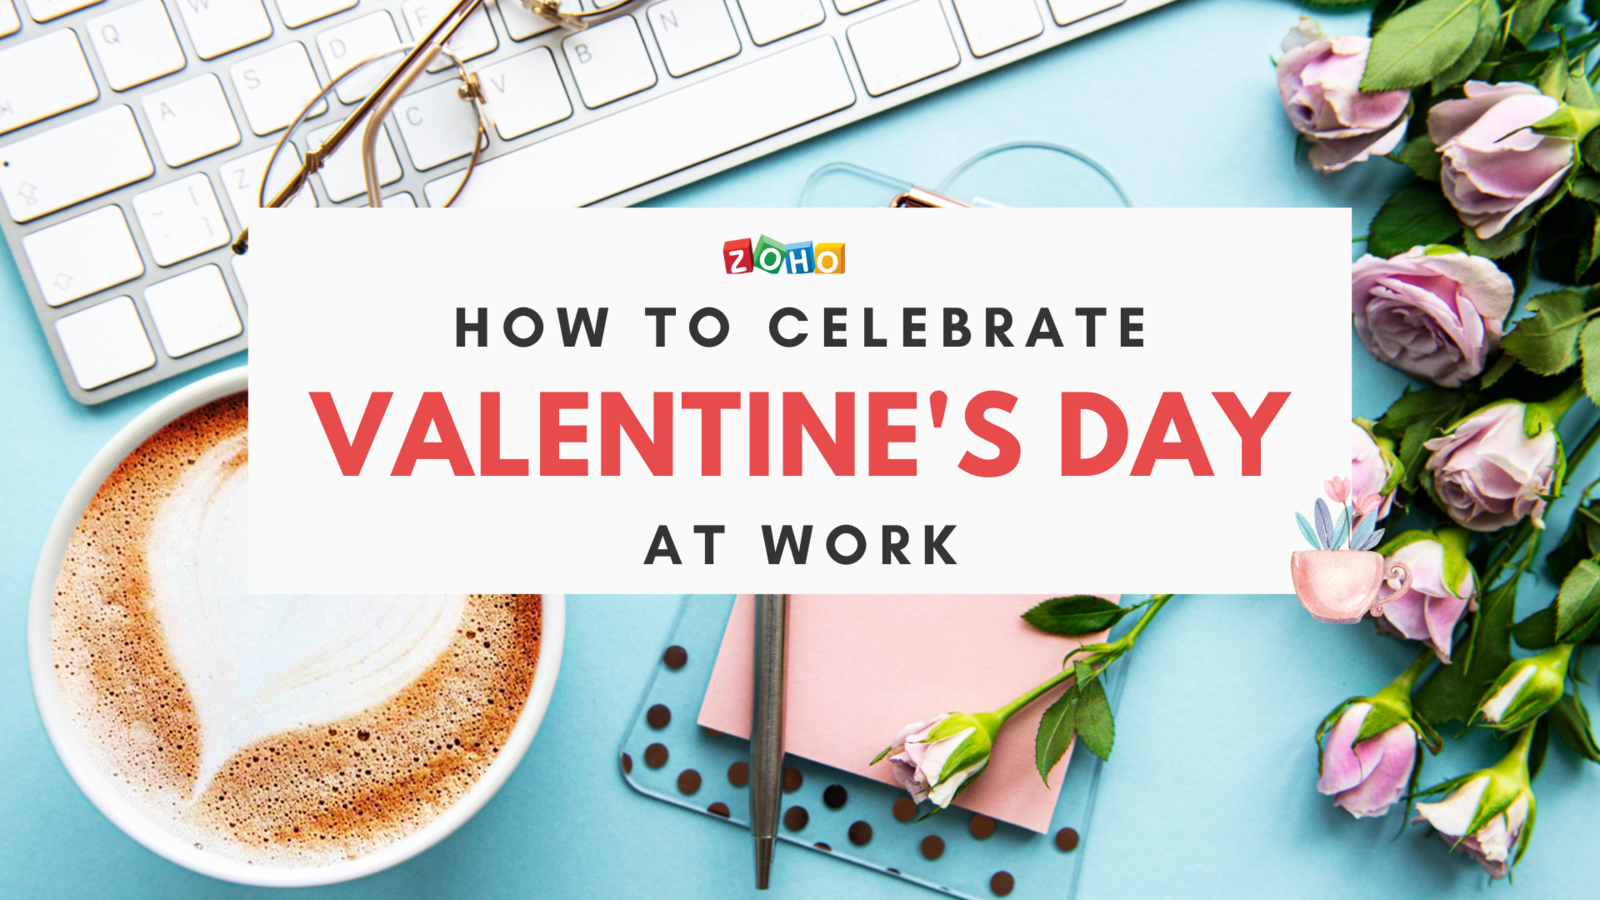 How To Celebrate Valentine's Day At Work